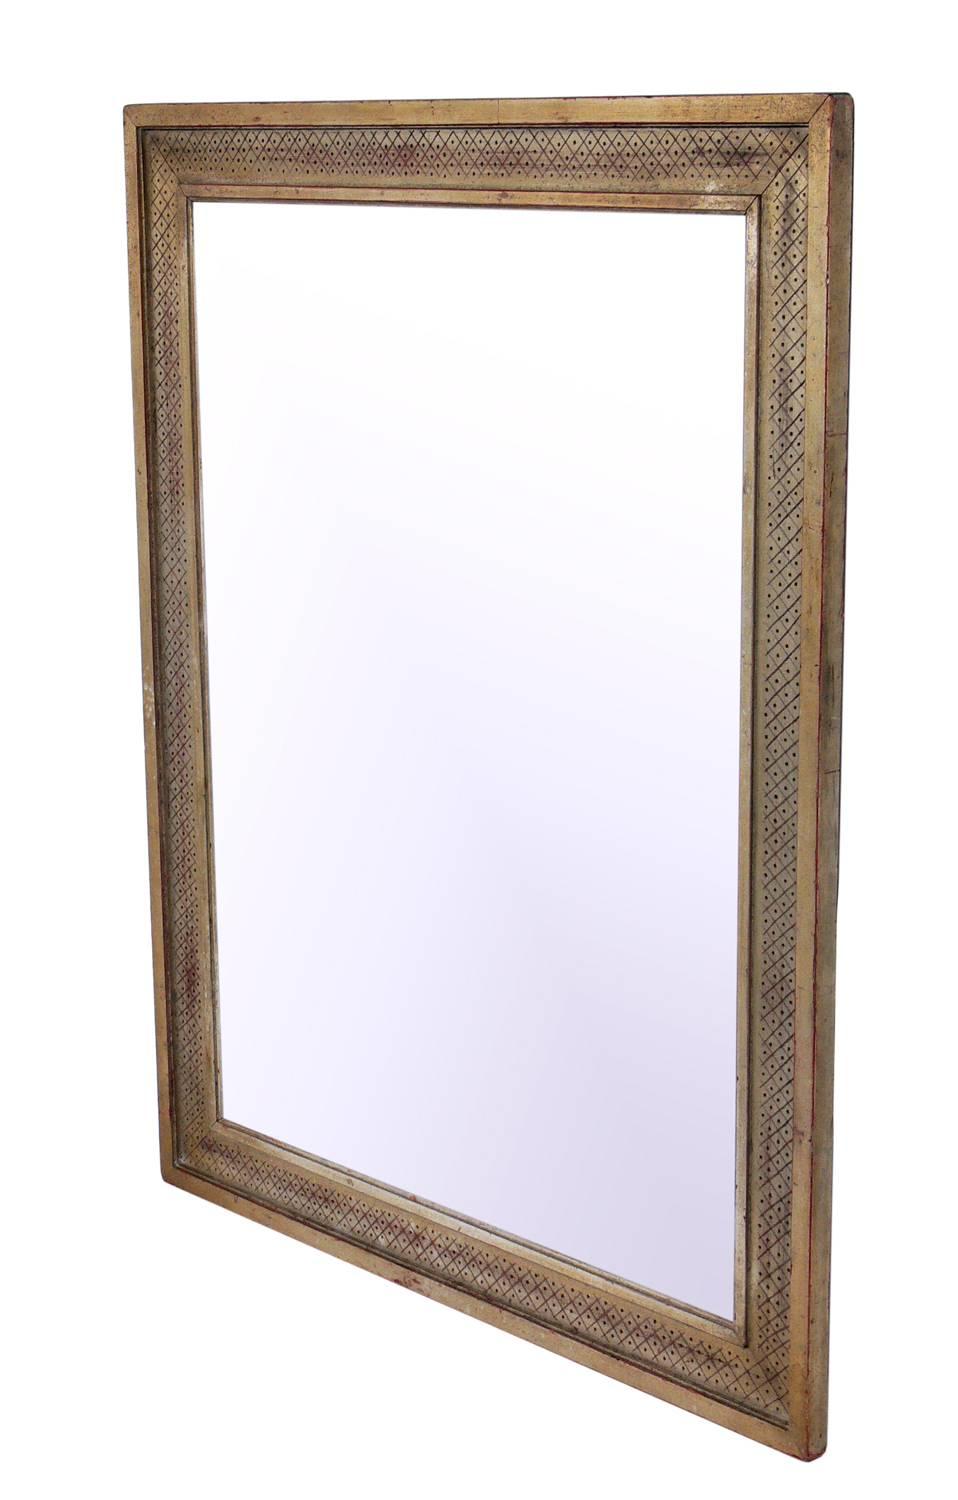 Elegant silver leaf mirror in the manner of Max Kuehne, American, circa 1930s. The silver leafed wood frame retains it's wonderful original patina. The mirrored glass has been replaced at some point.